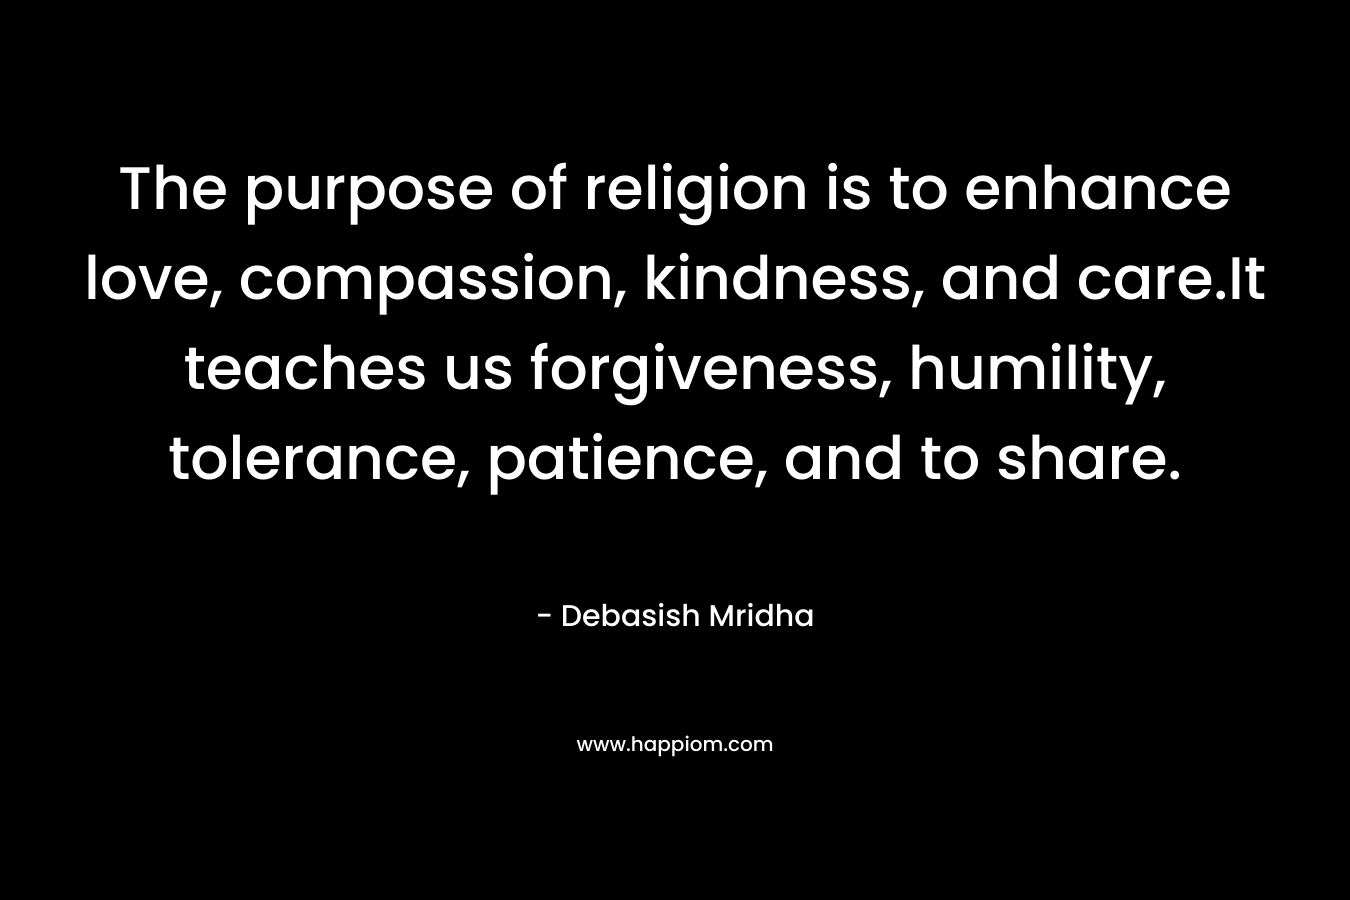 The purpose of religion is to enhance love, compassion, kindness, and care.It teaches us forgiveness, humility, tolerance, patience, and to share.